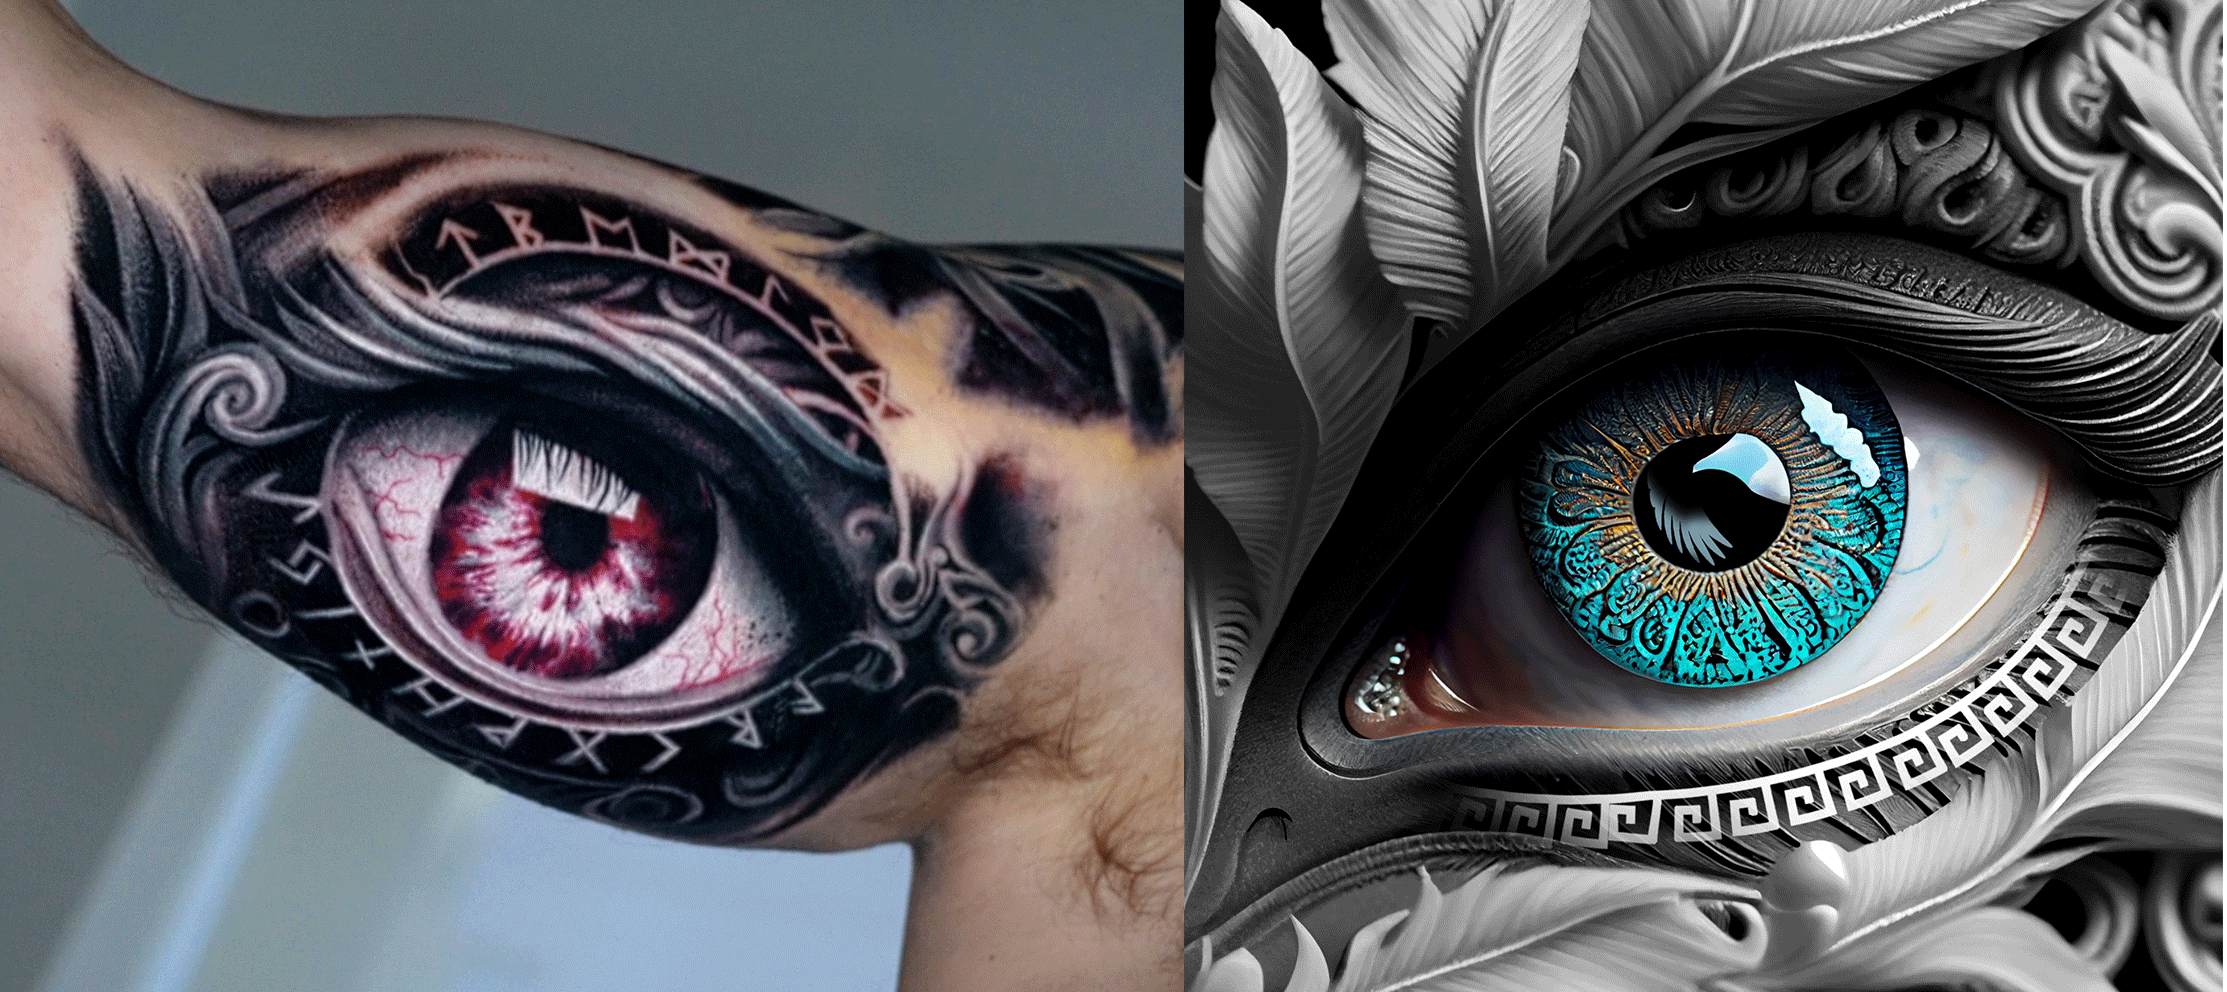 Cool Eye Tattoo Ideas for Your Next Ink - tattoos near me